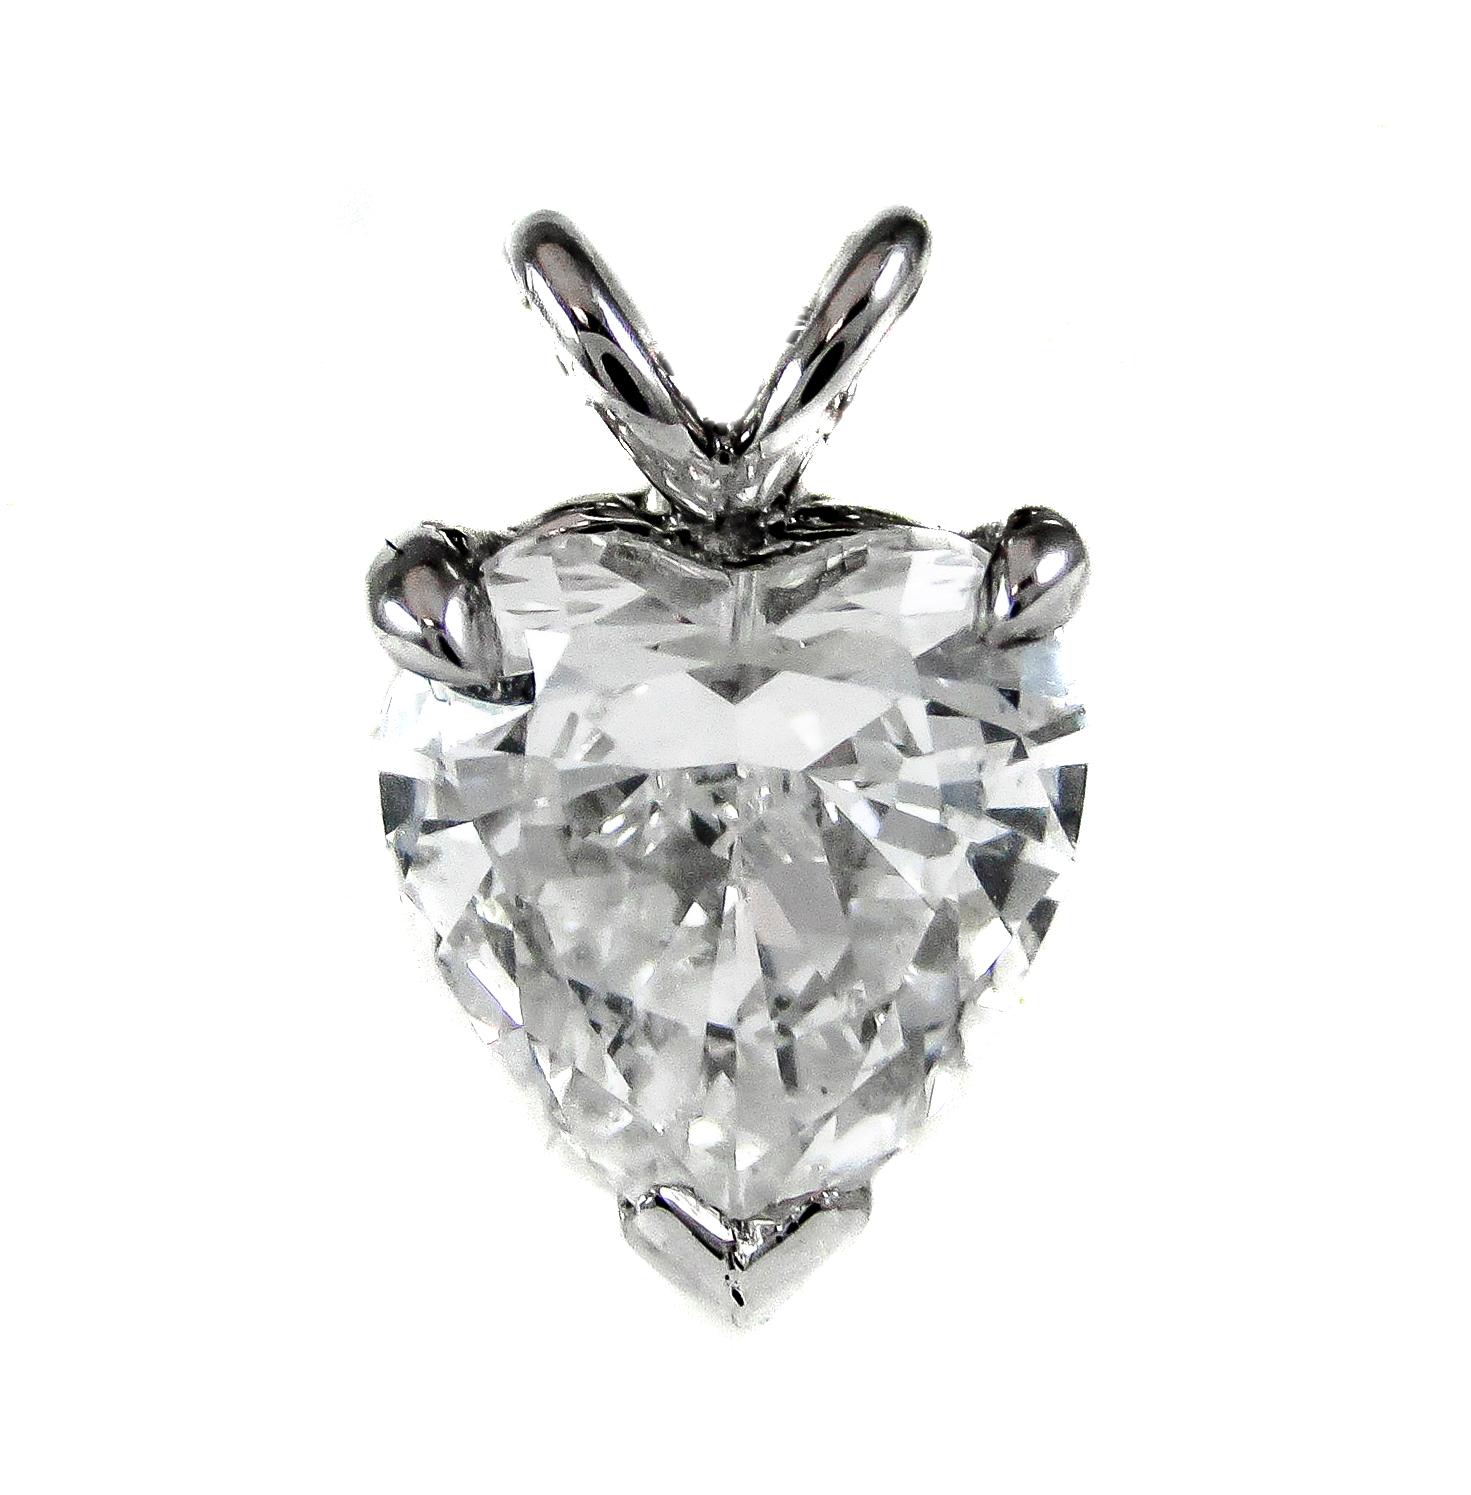 A chic bright white heart shaped diamond, with a GIA color grade of D and clarity VS2, is set in a platinum prong setting and chain that is great for everyday wear. The extremely well cut heart-shape diamond displays an incredible amount of sparkle,